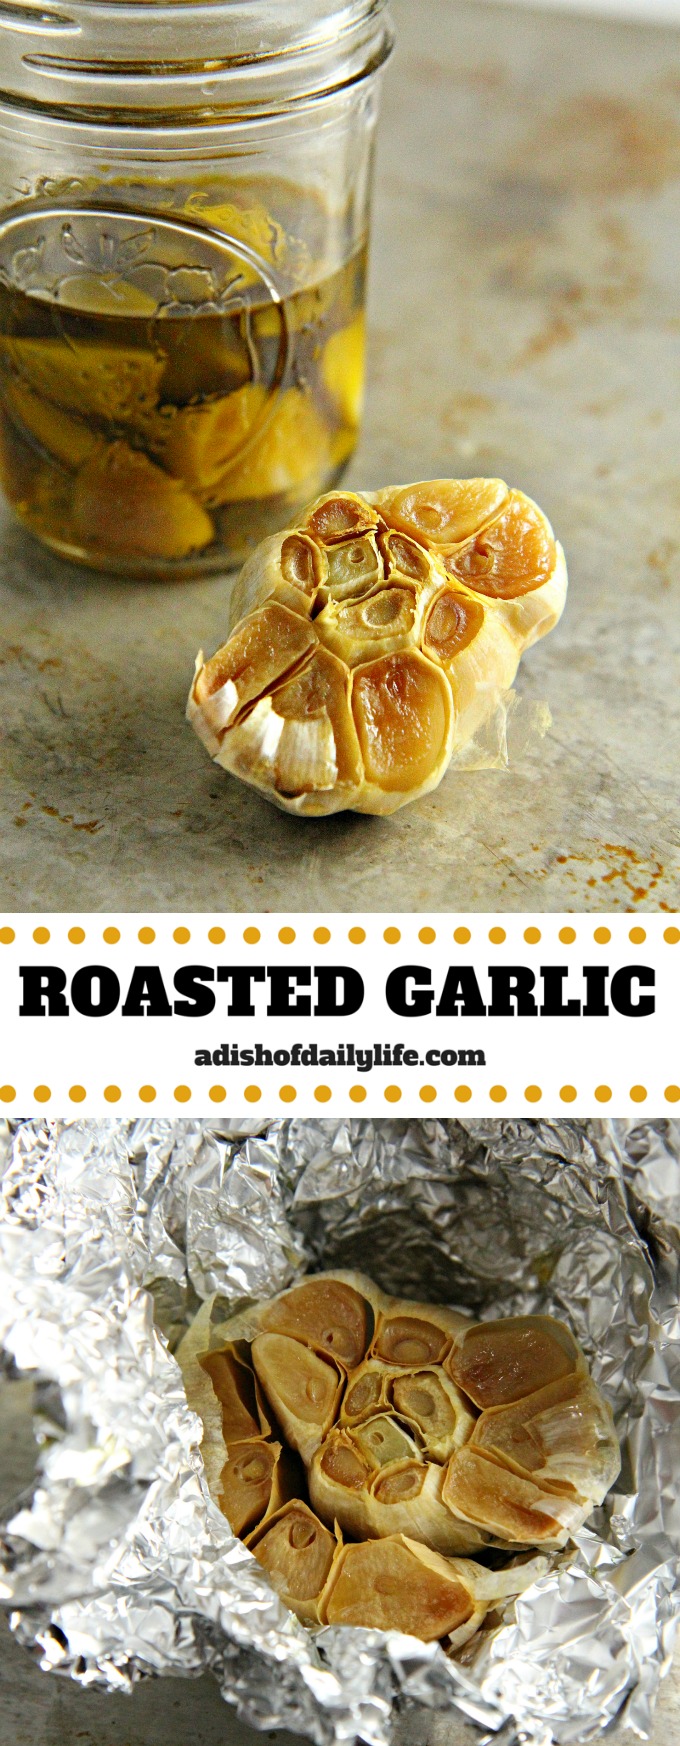 Learn how to roast garlic with this easy kitchen tutorial. The sweet, mild taste of roasted garlic adds wonderful flavor to garlic bread, pastas, soups and sauces!